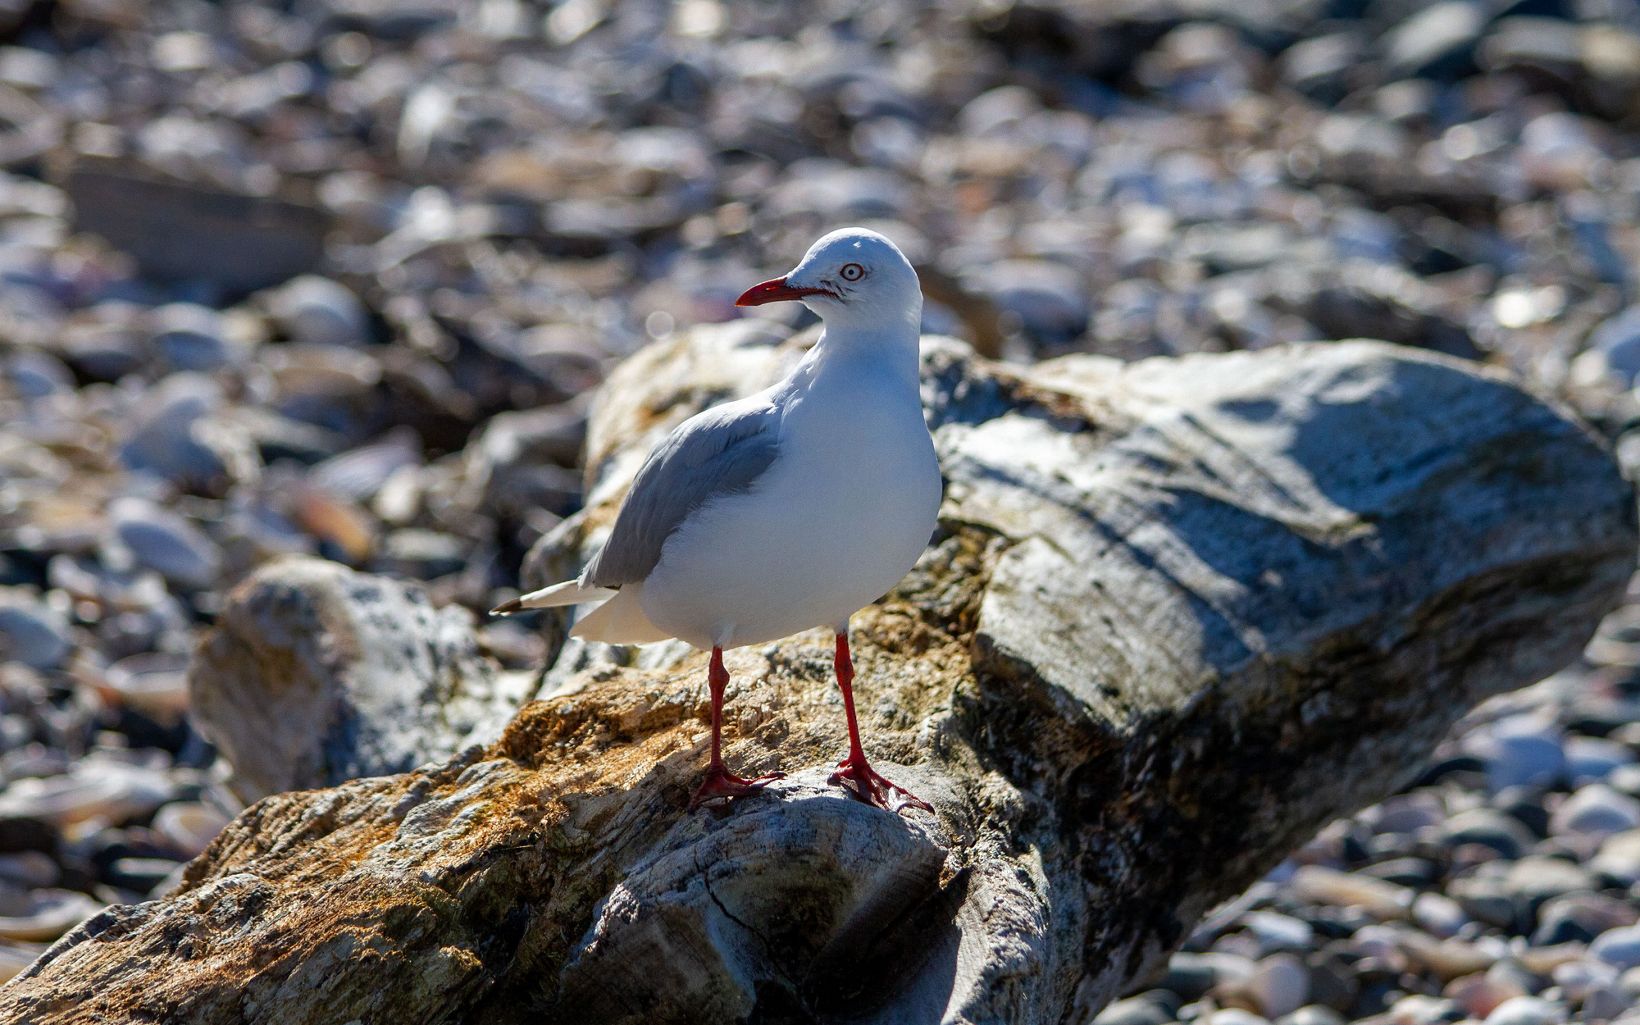 Red-billed Gull Endemic to New Zealand, this gull eyed us hopefully, keeping track of crumbs as we finished our snacks on the beach. Red-billed gulls breed widely on islands such as Otata. © Ethan Kearns/The Nature Conservancy